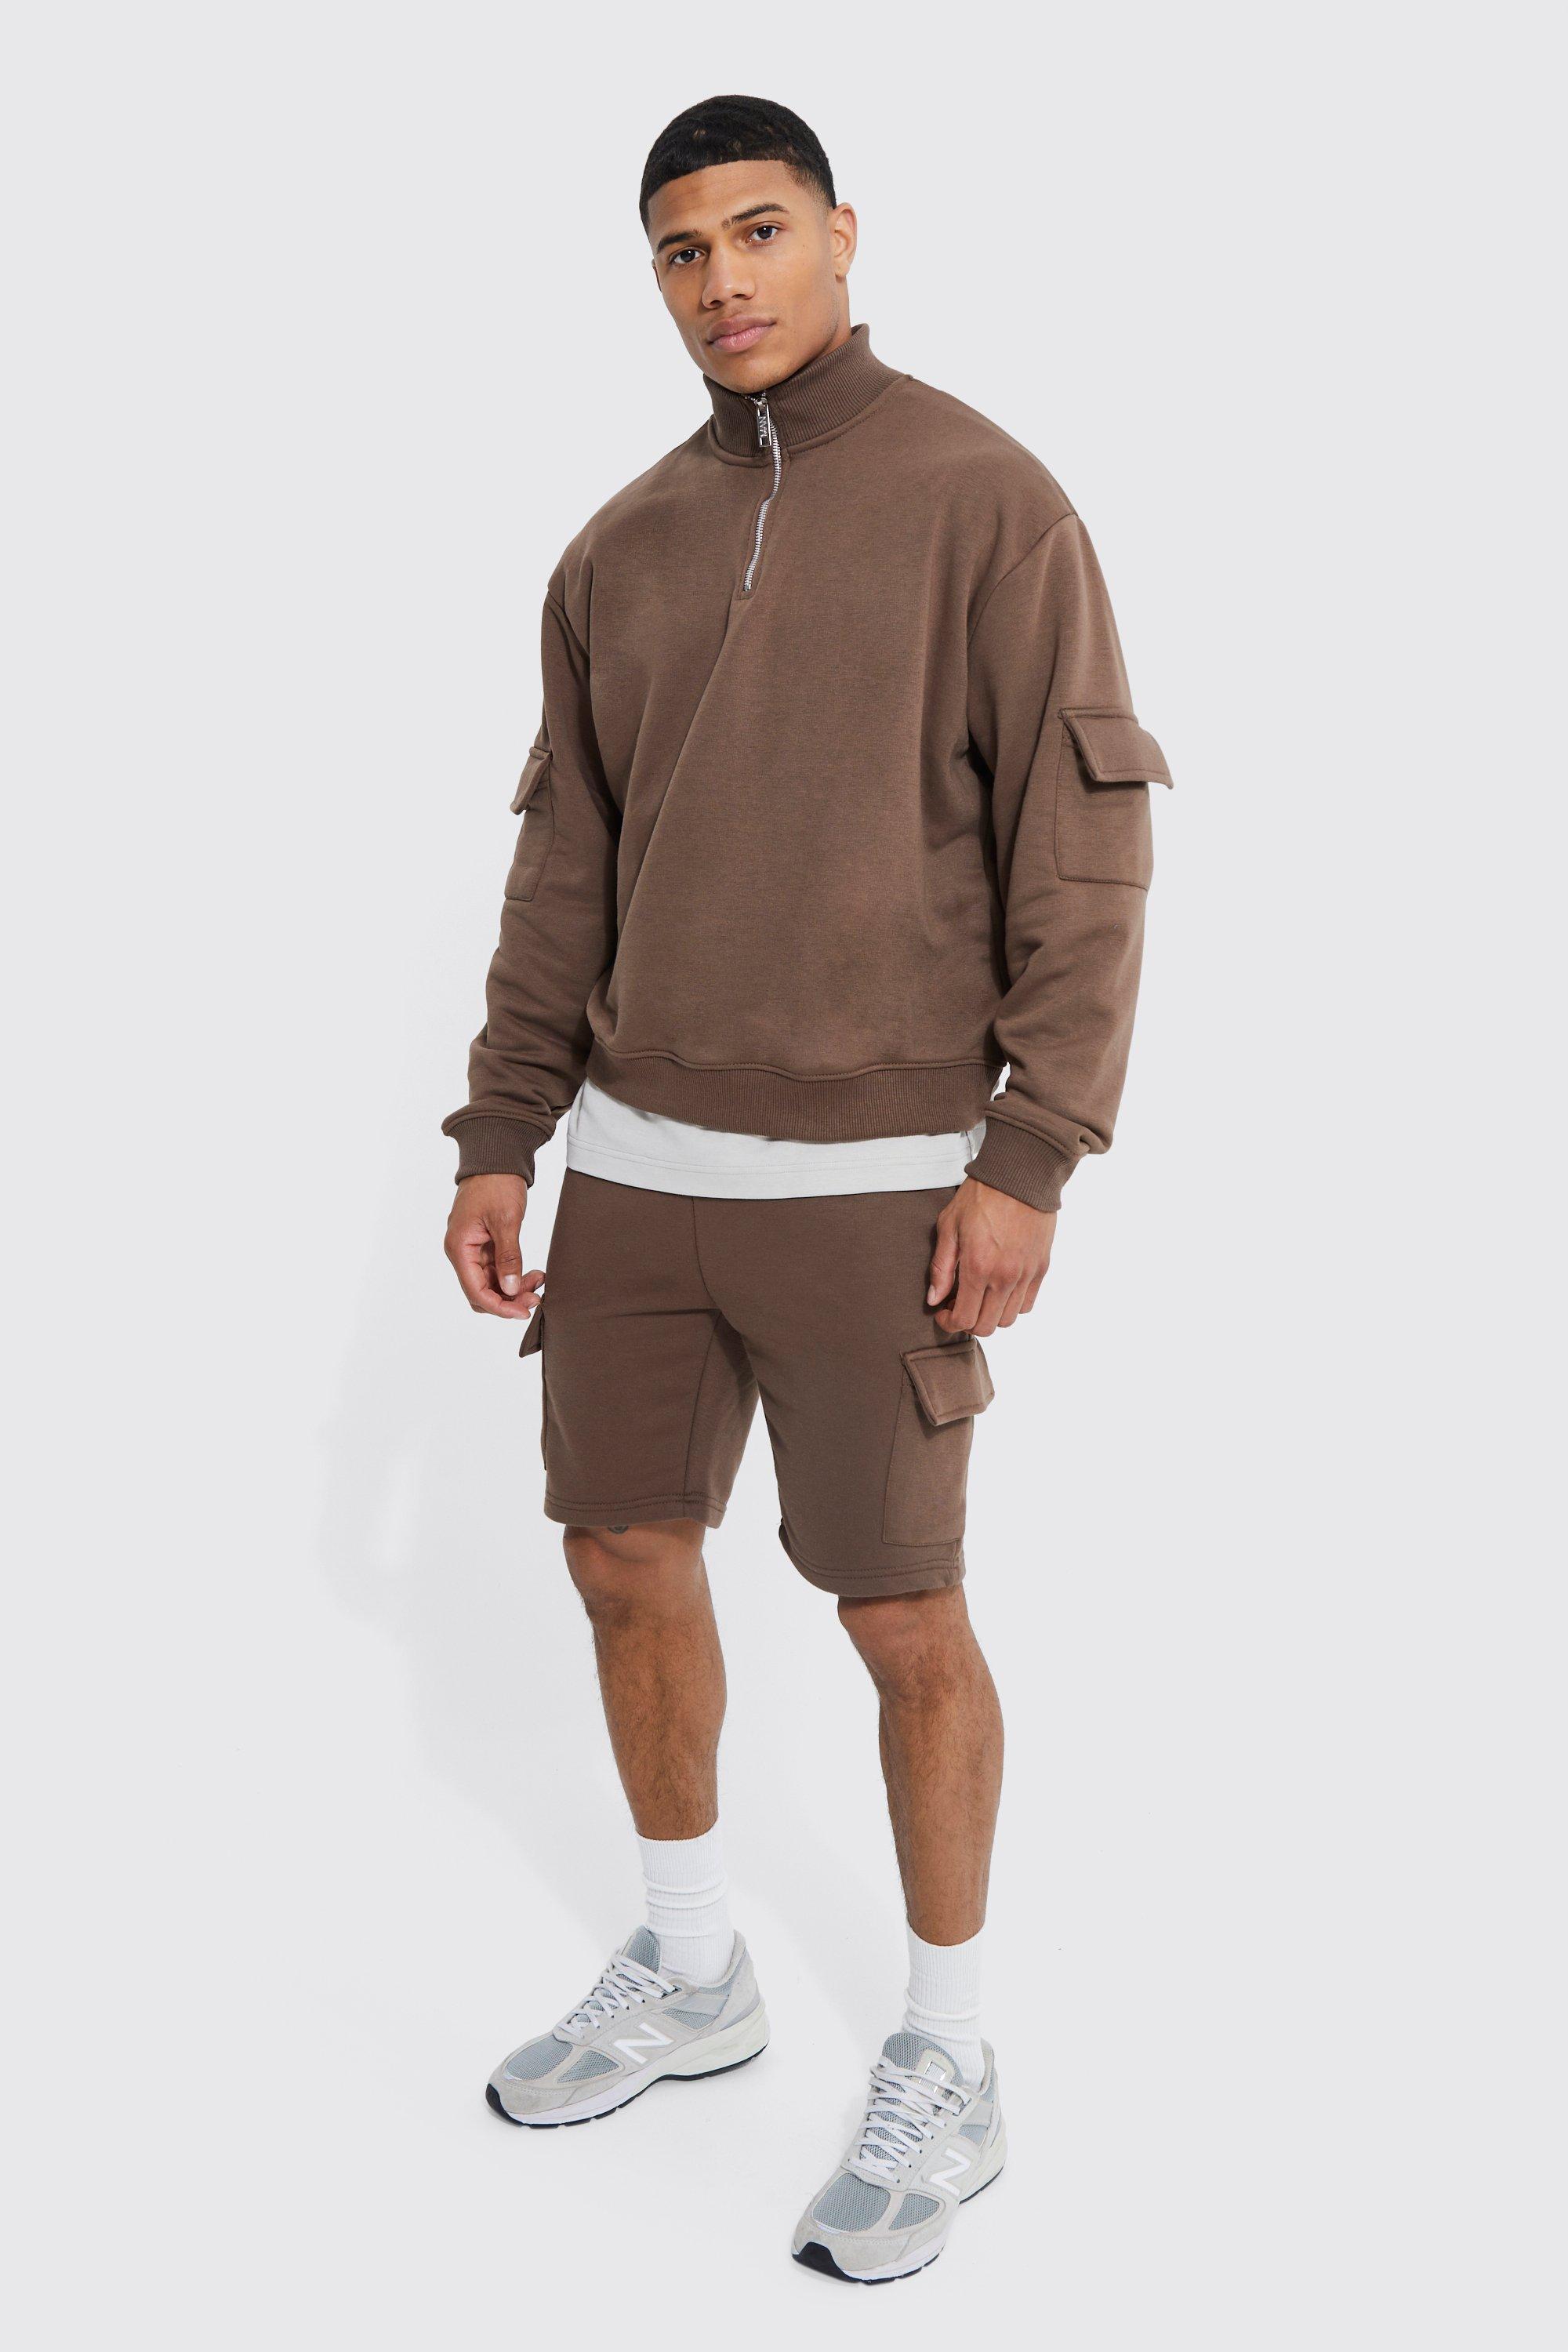 BoohooMAN Oversized Boxy Cargo Zip Funnel Short Tracksuit in Brown for ...